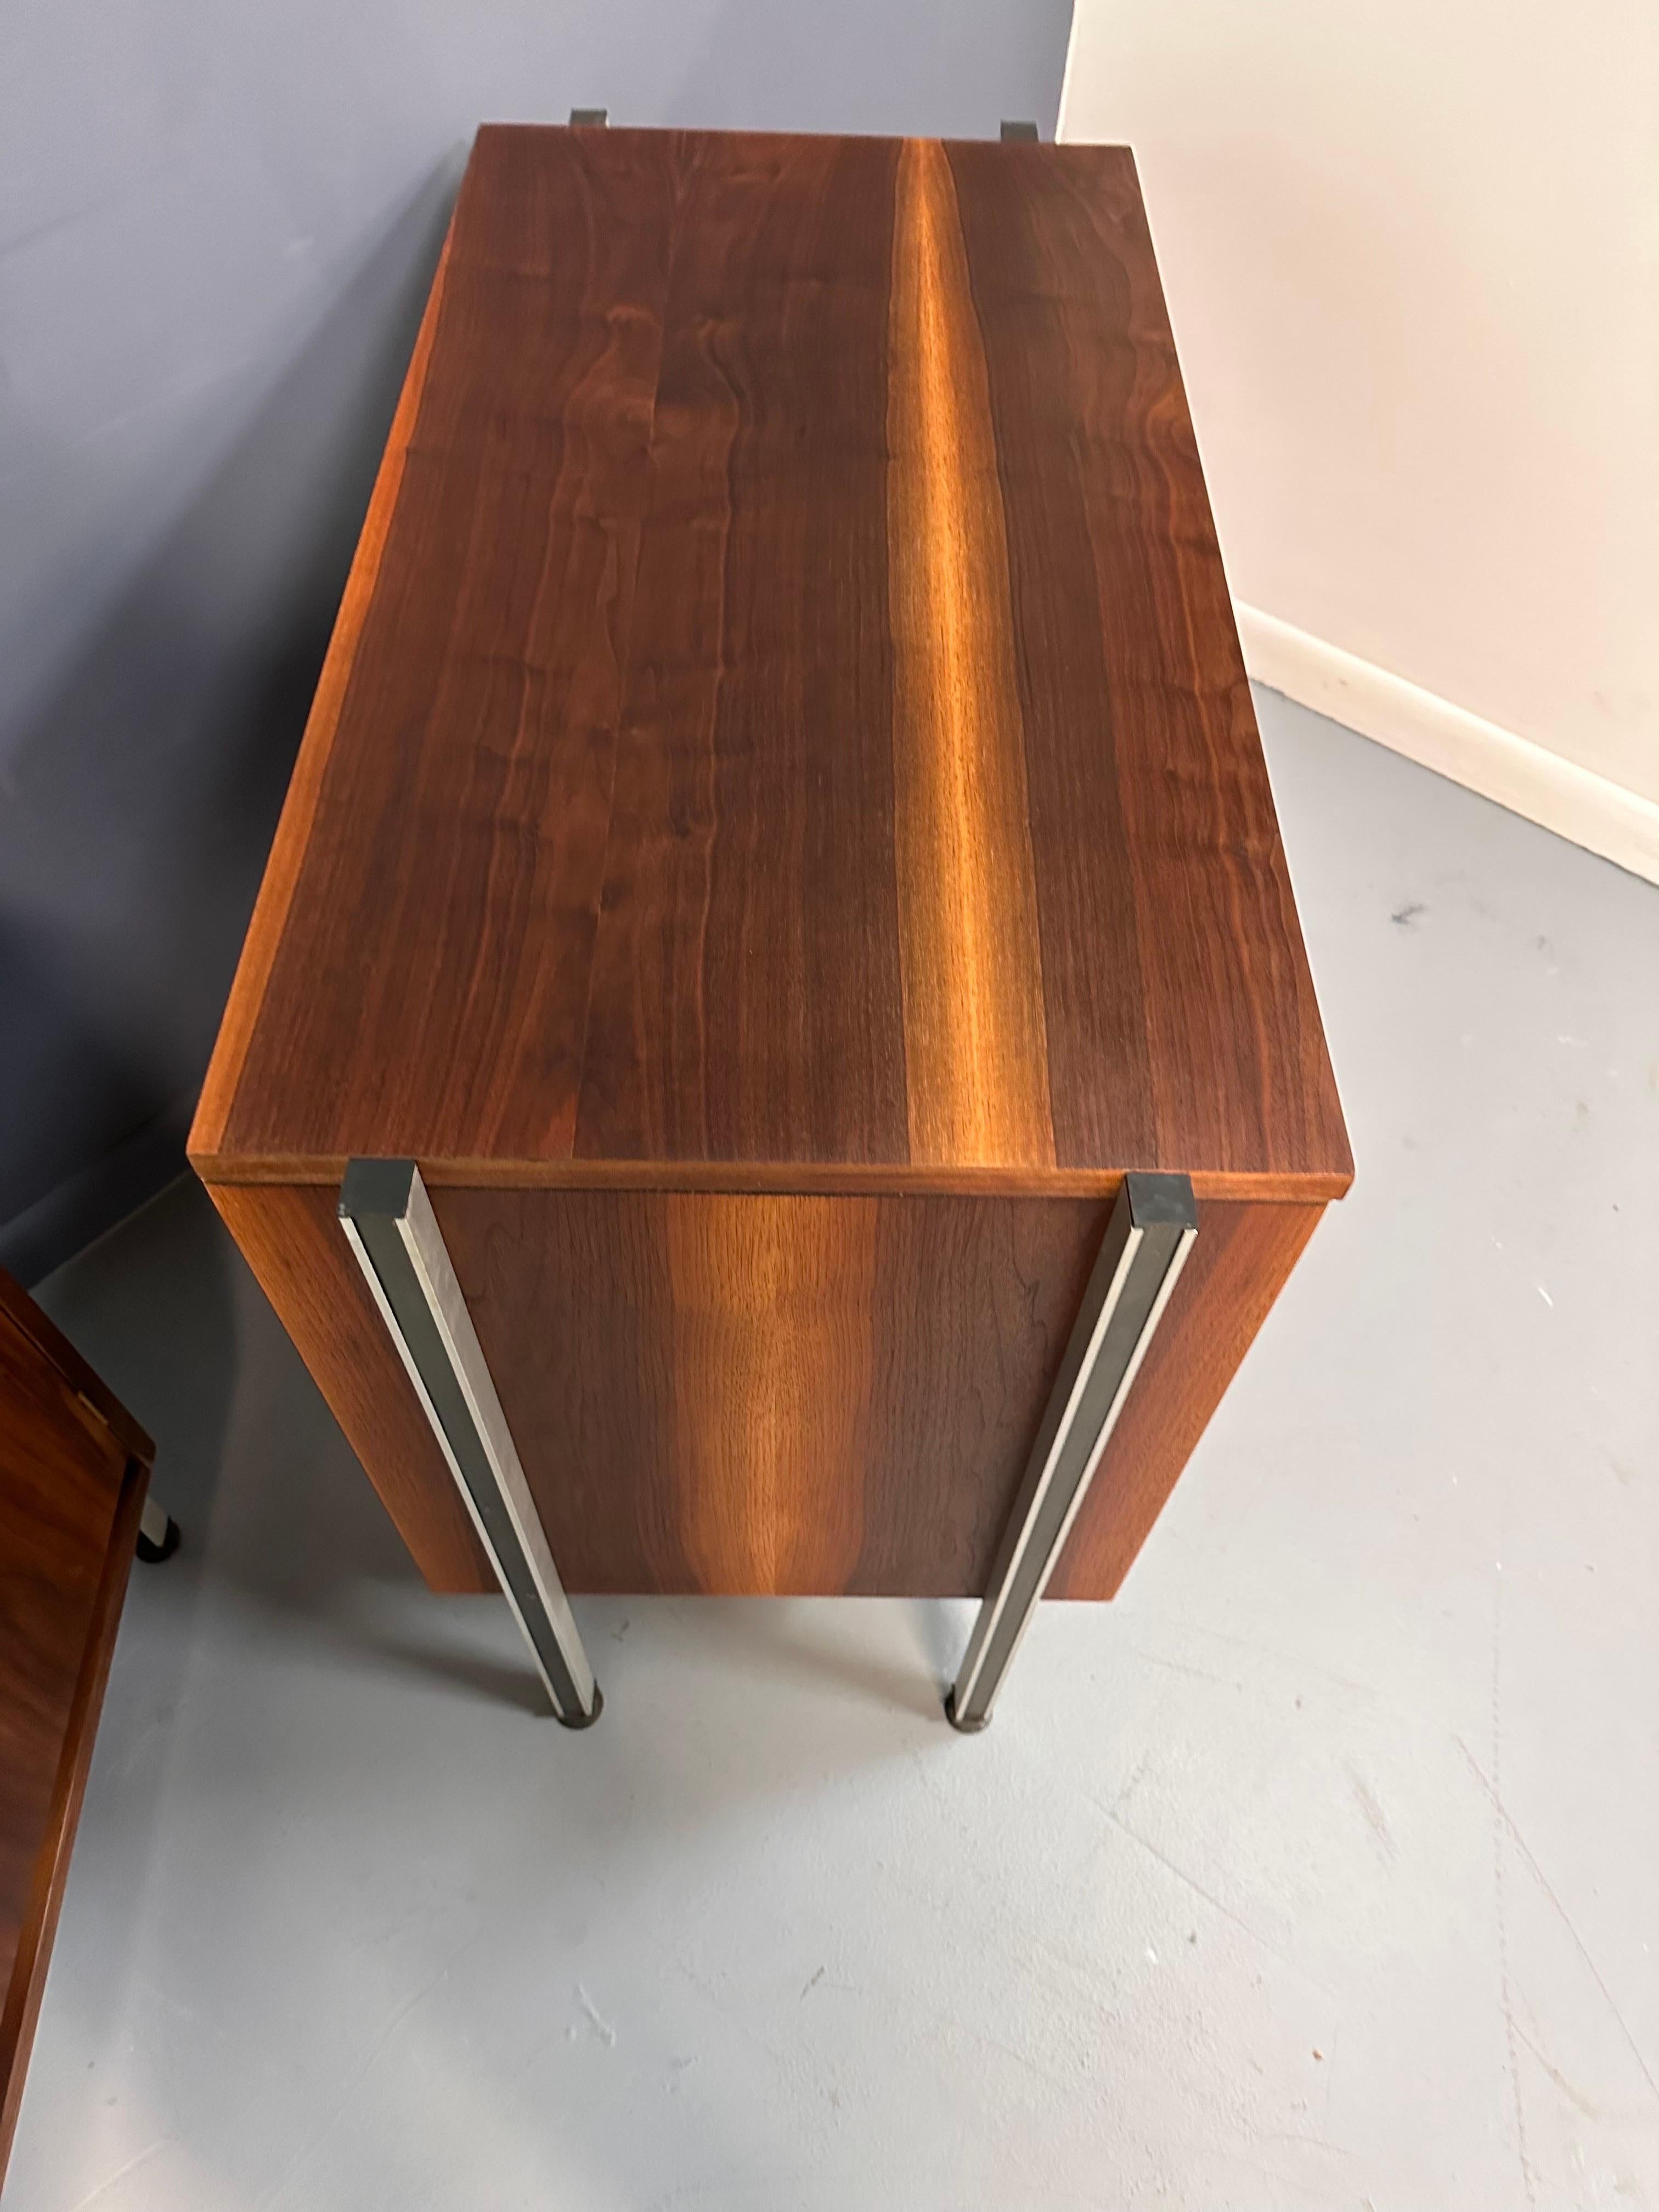 Pair of Midcentury Walnut Cabinets with Exposed Aluminum Legs Style of Wormley For Sale 4